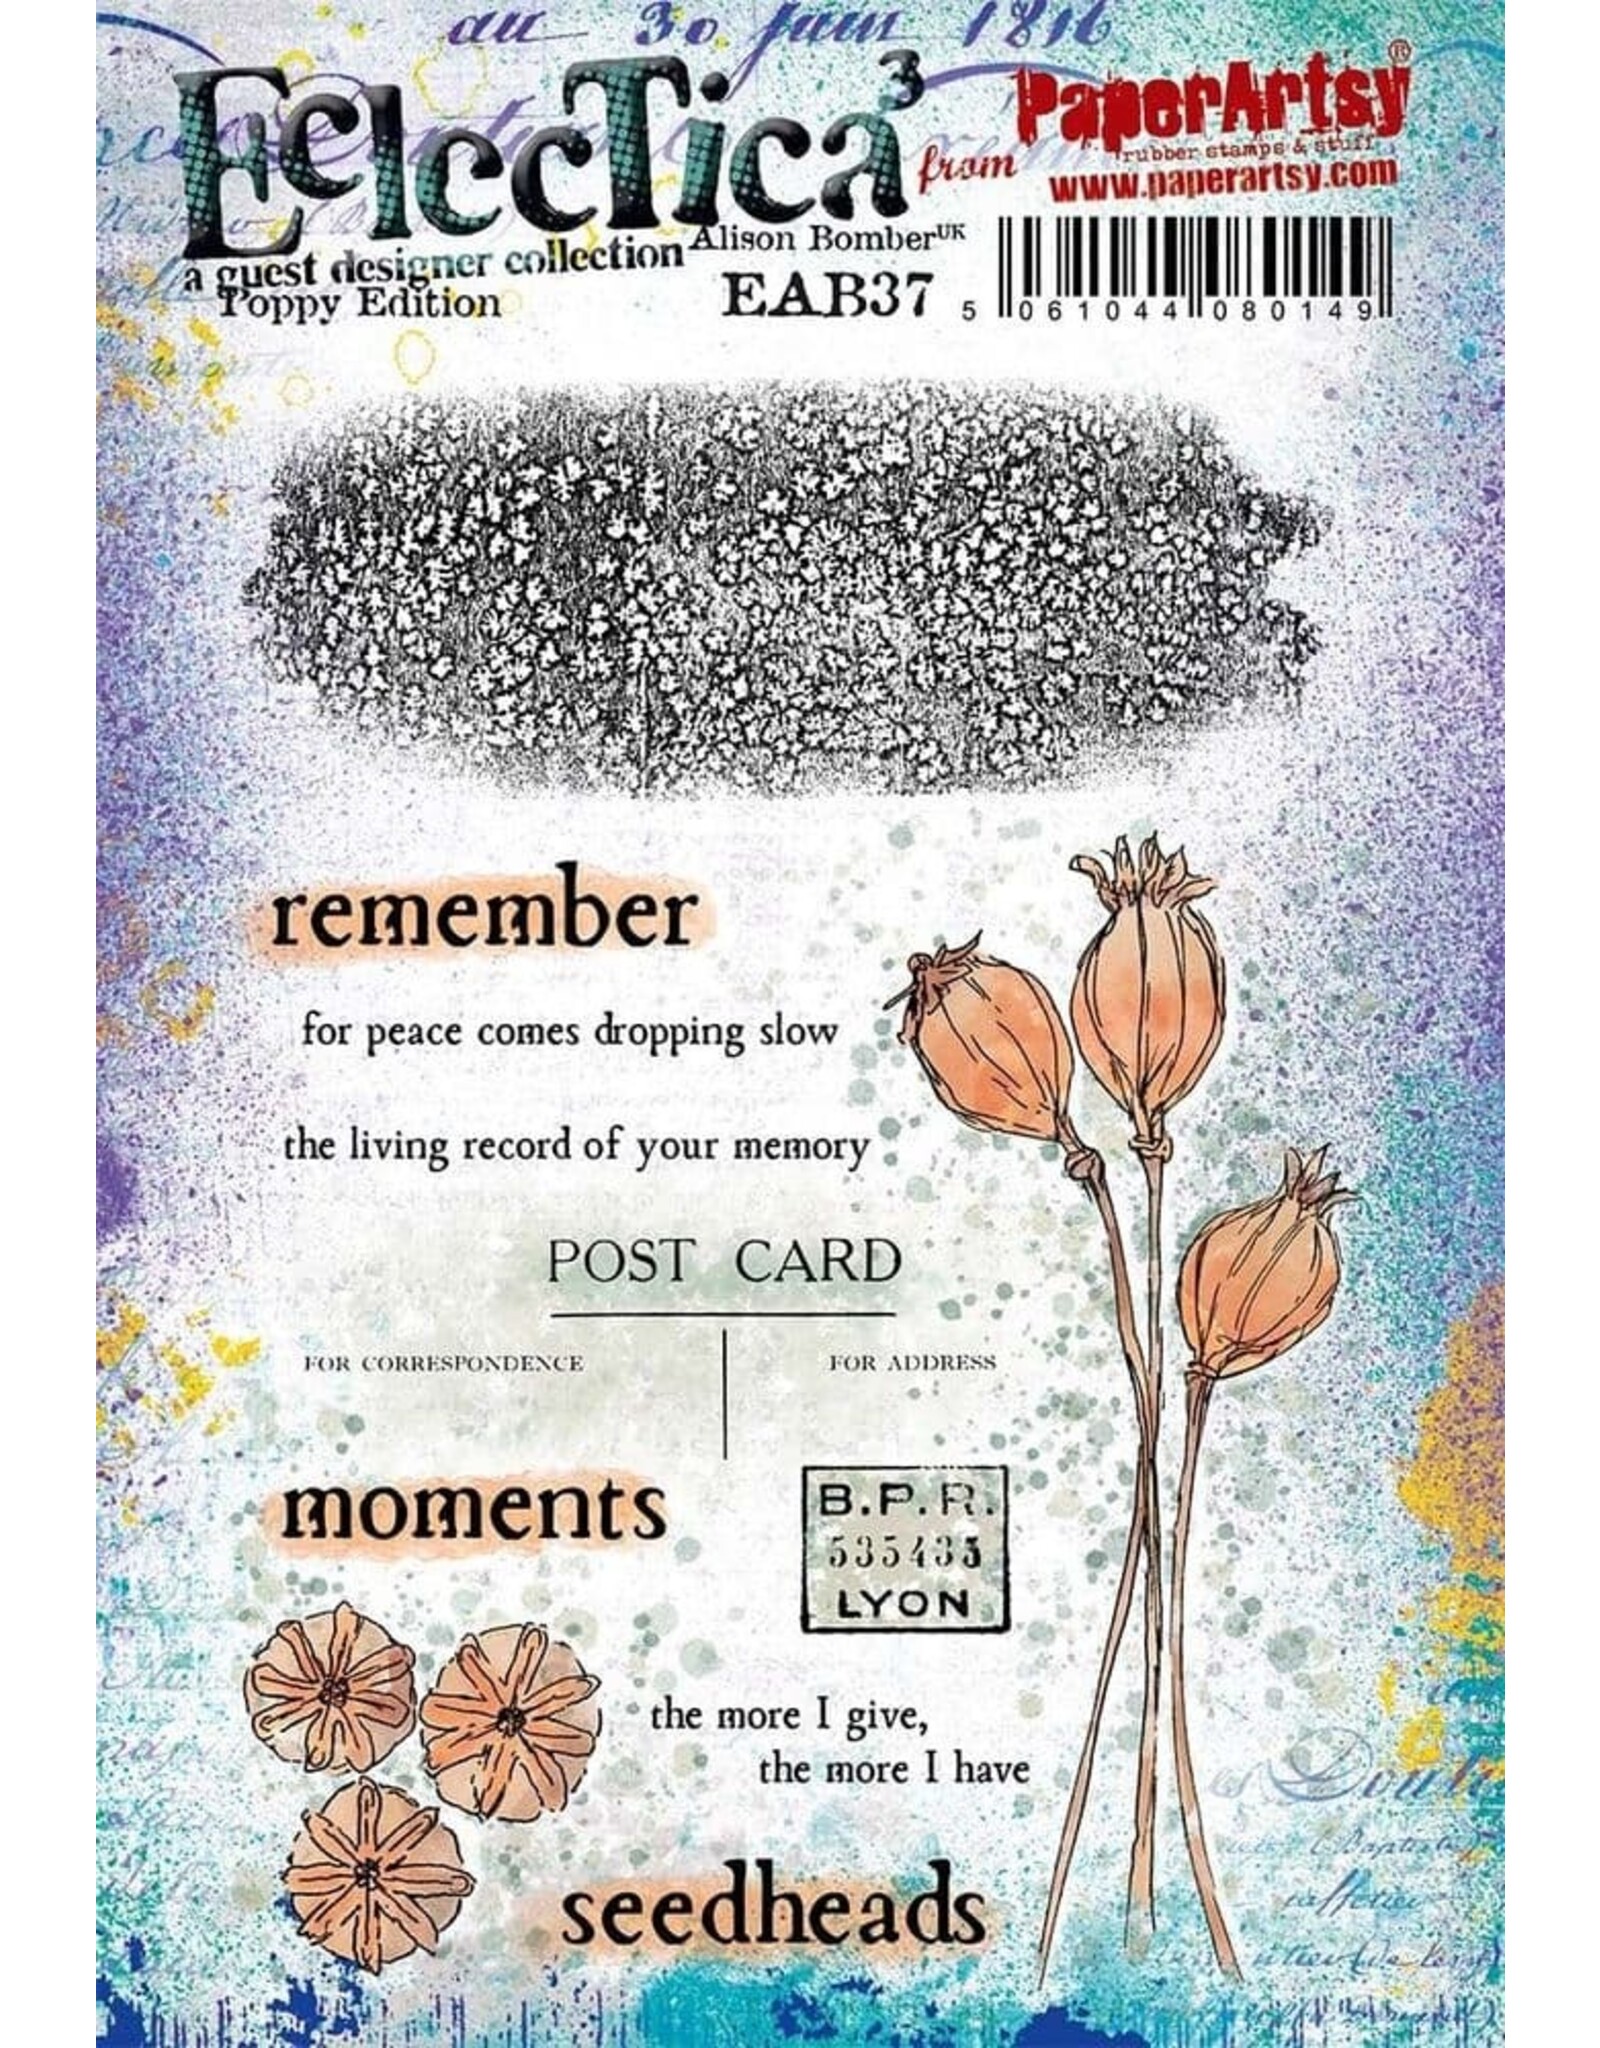 PAPER ARTSY PAPER ARTSY ECLECTICA ALISON BOMBER POPPY EDITION EAB37 CLING STAMP SET